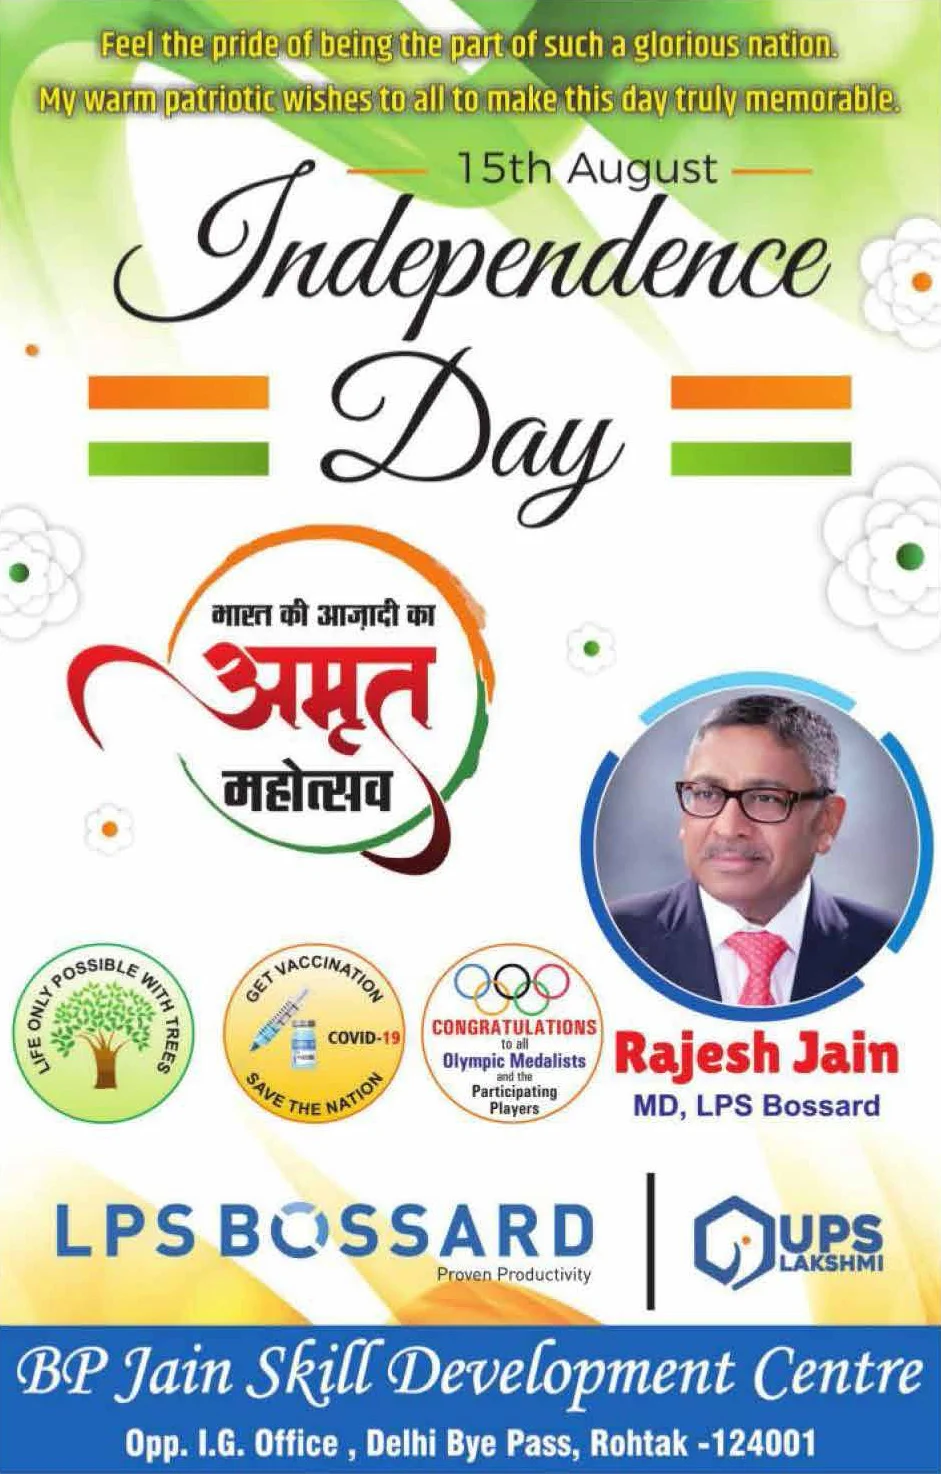 #2 LPS Bossard: Wishes 15th August Independence Day